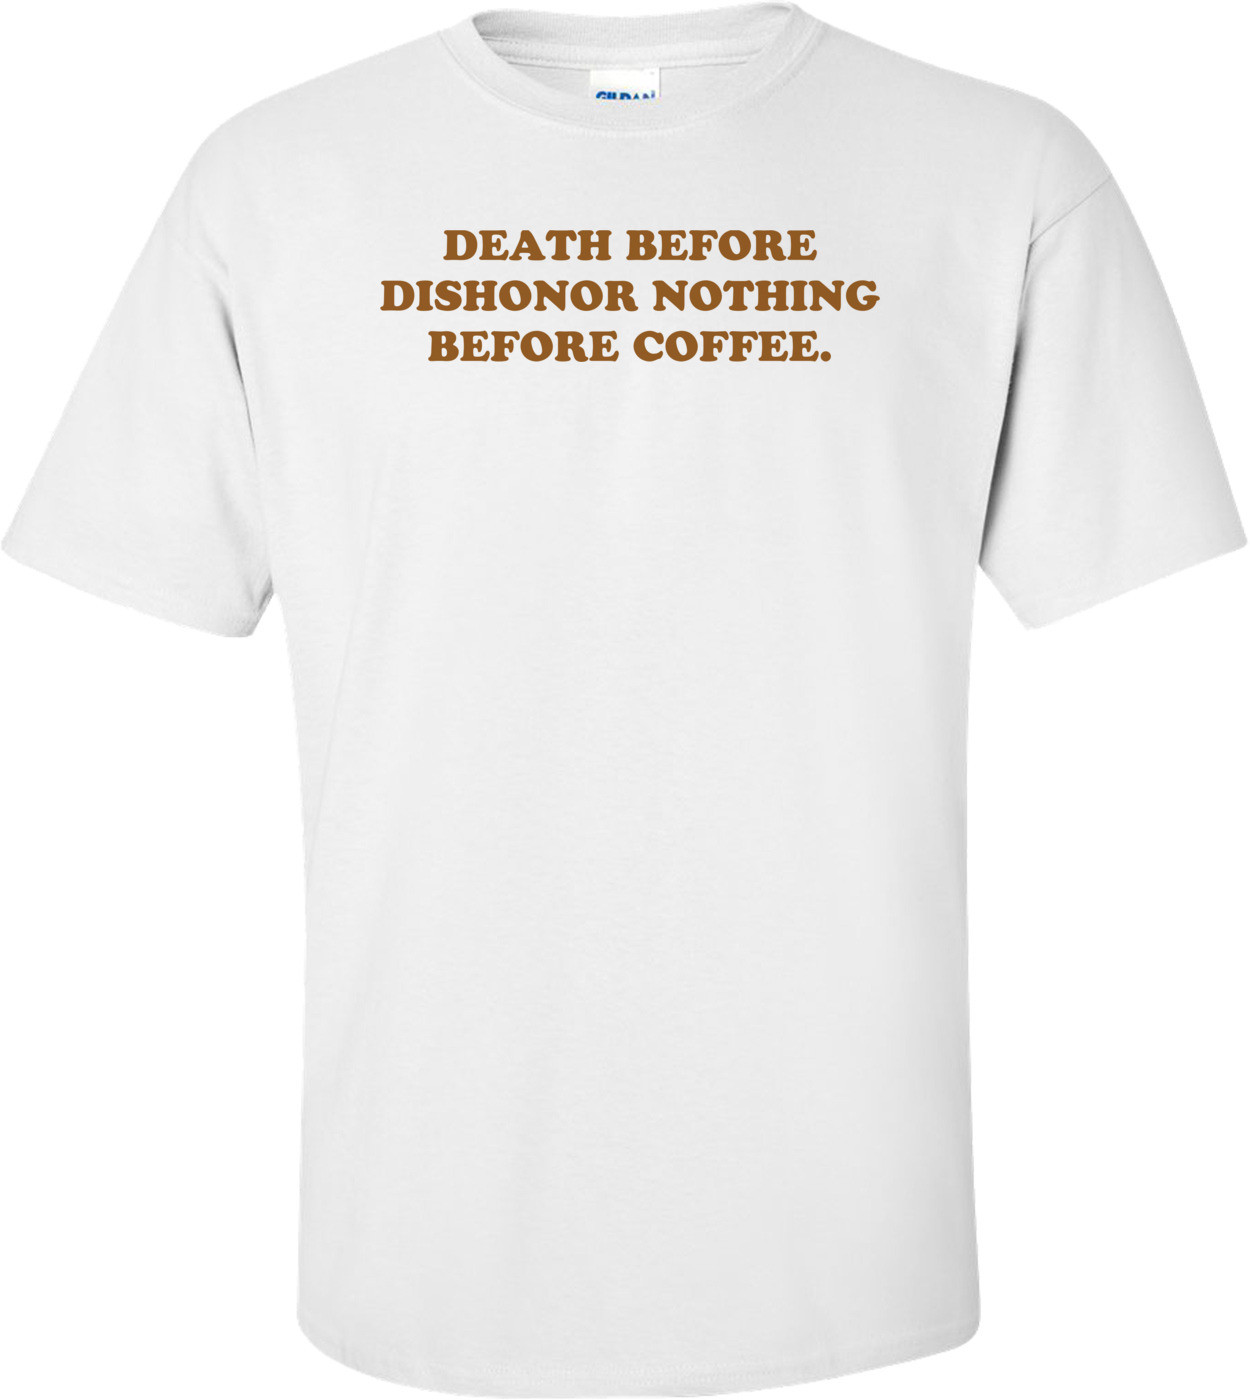 DEATH BEFORE DISHONOR NOTHING BEFORE COFFEE.